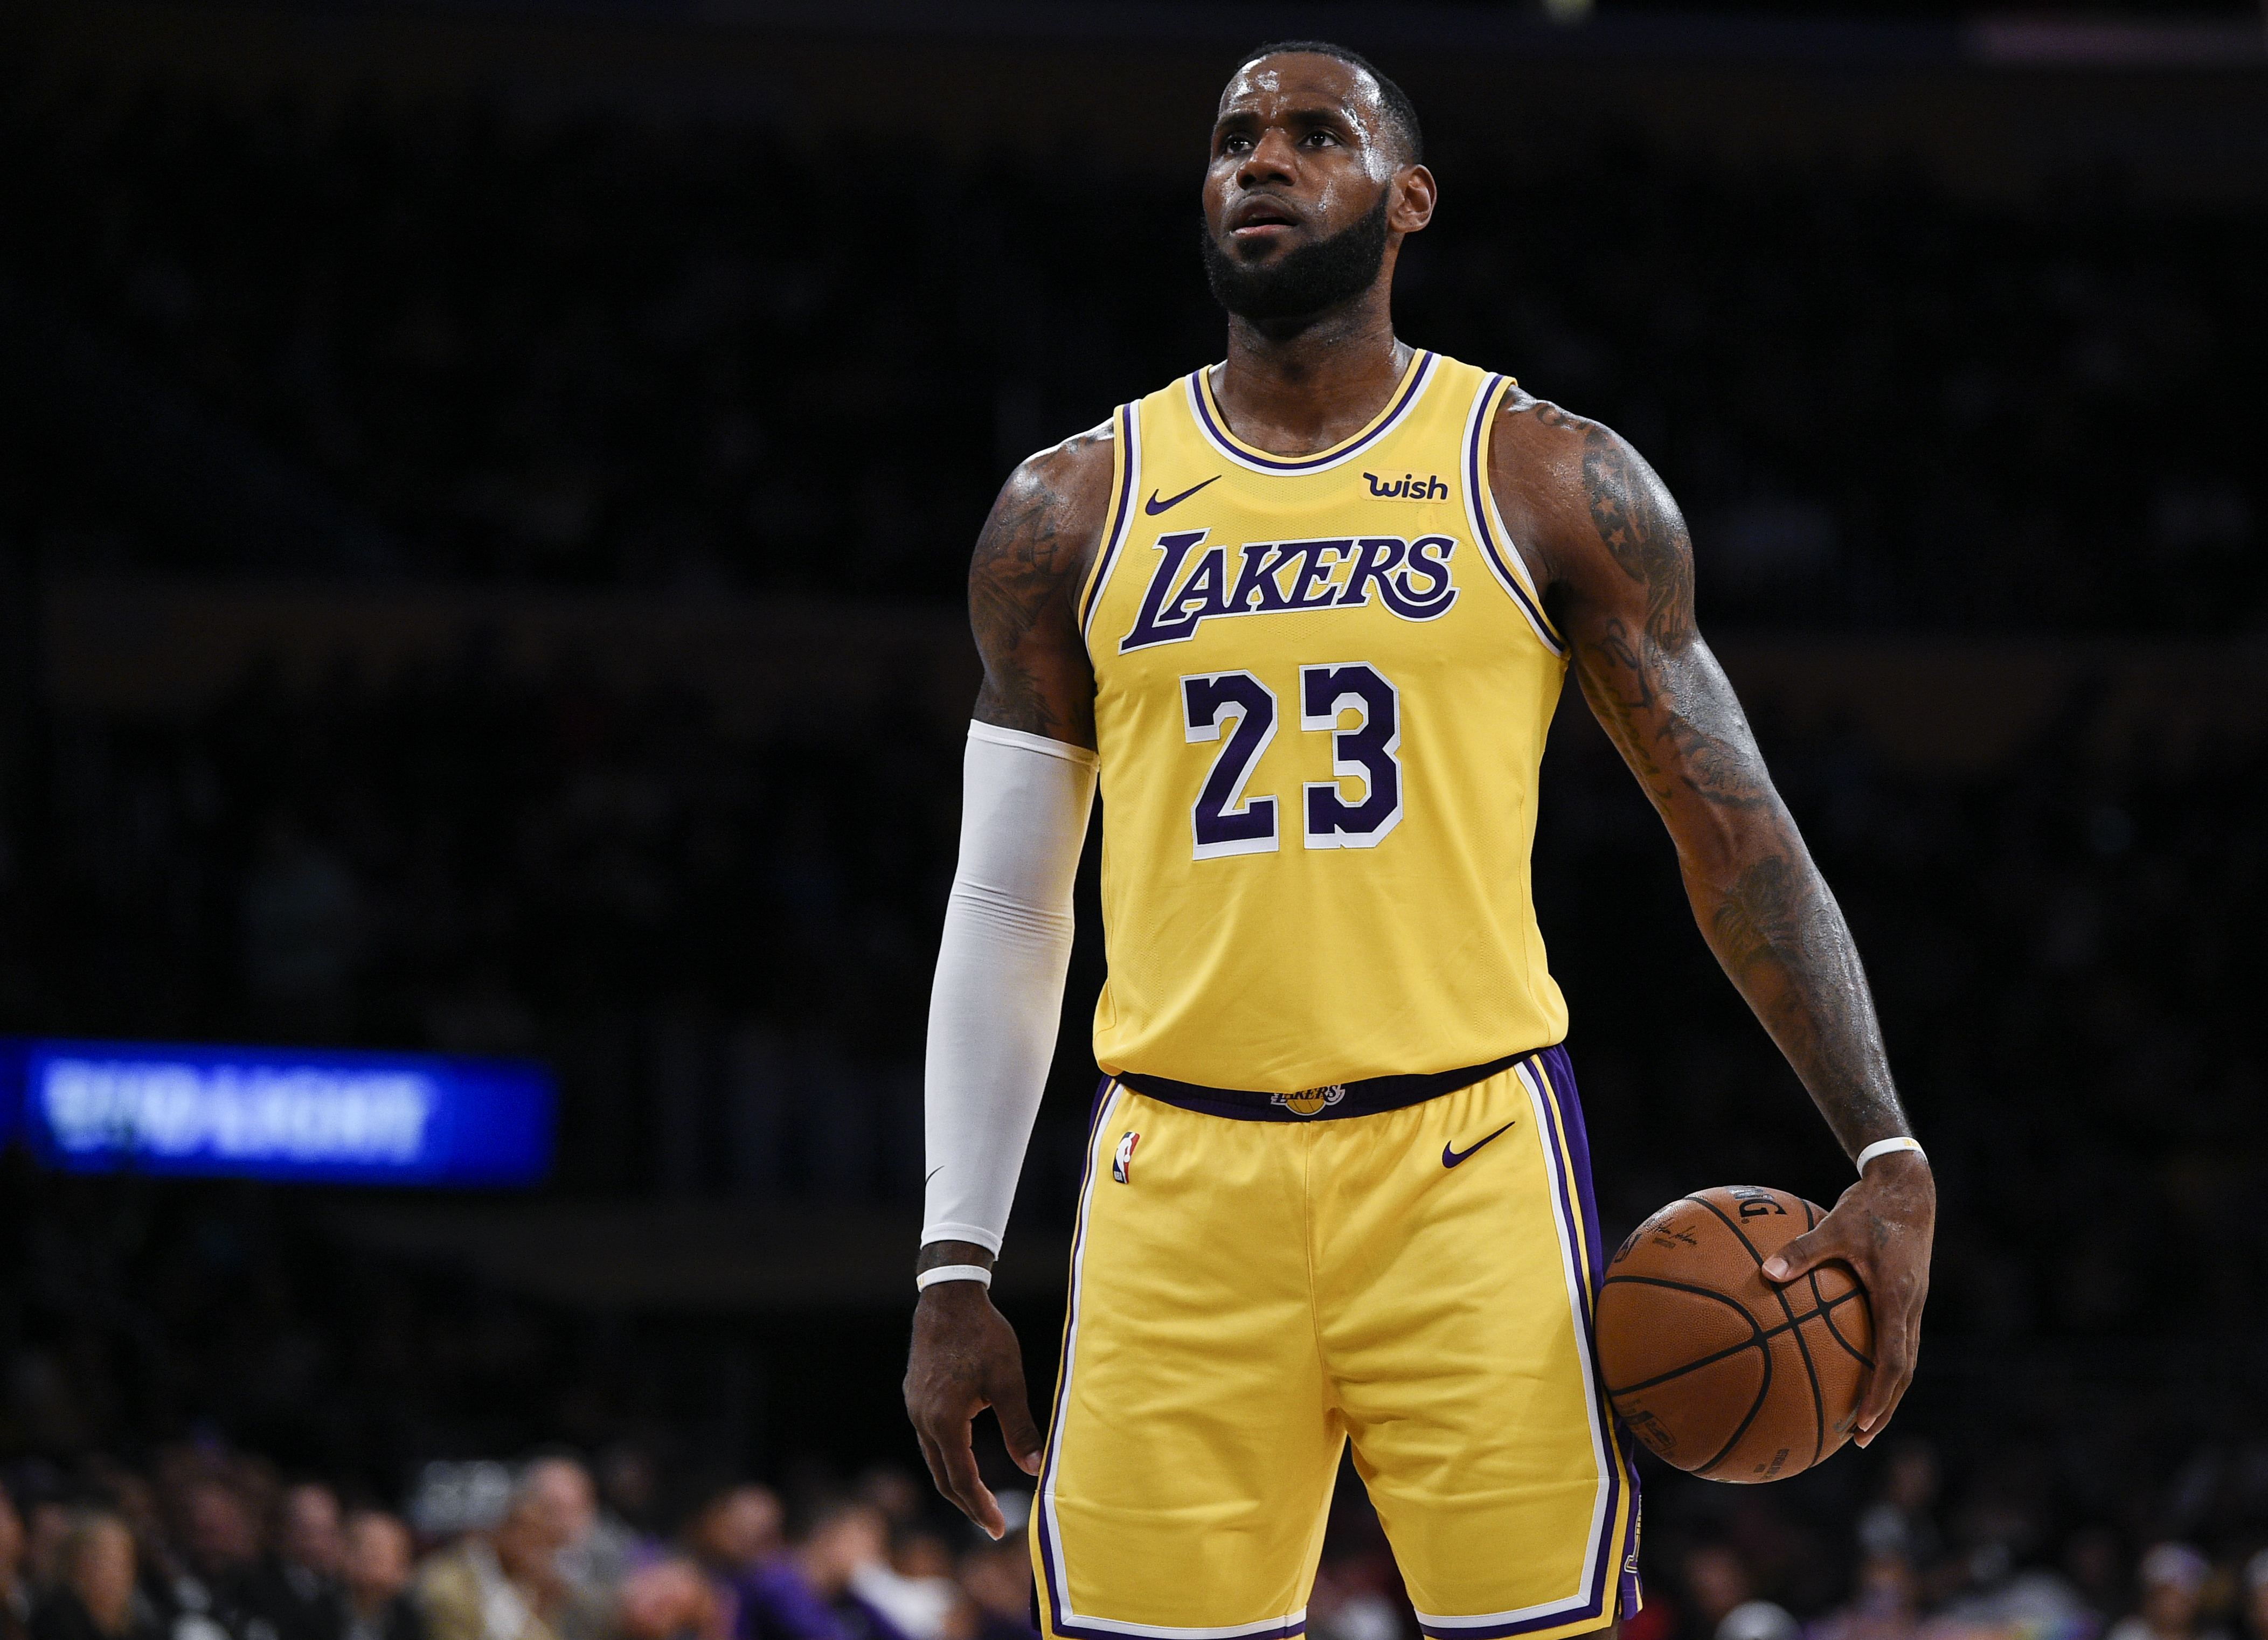 Lebron James On The Lakers - HD Wallpaper 